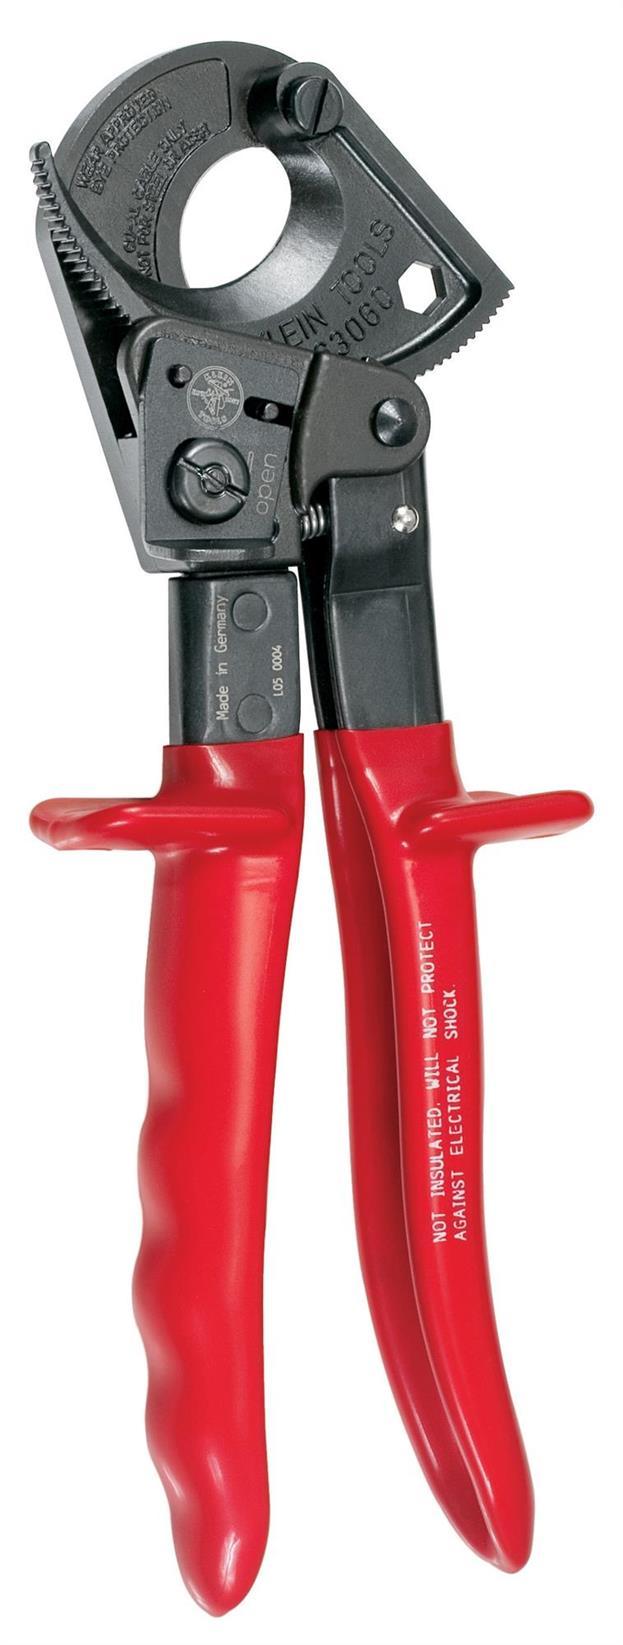 Cable cutter for copper and aluminium non-armoured cables up to 240mm². Ratchet design gives a large capacity tool that can fit in any toolbox.